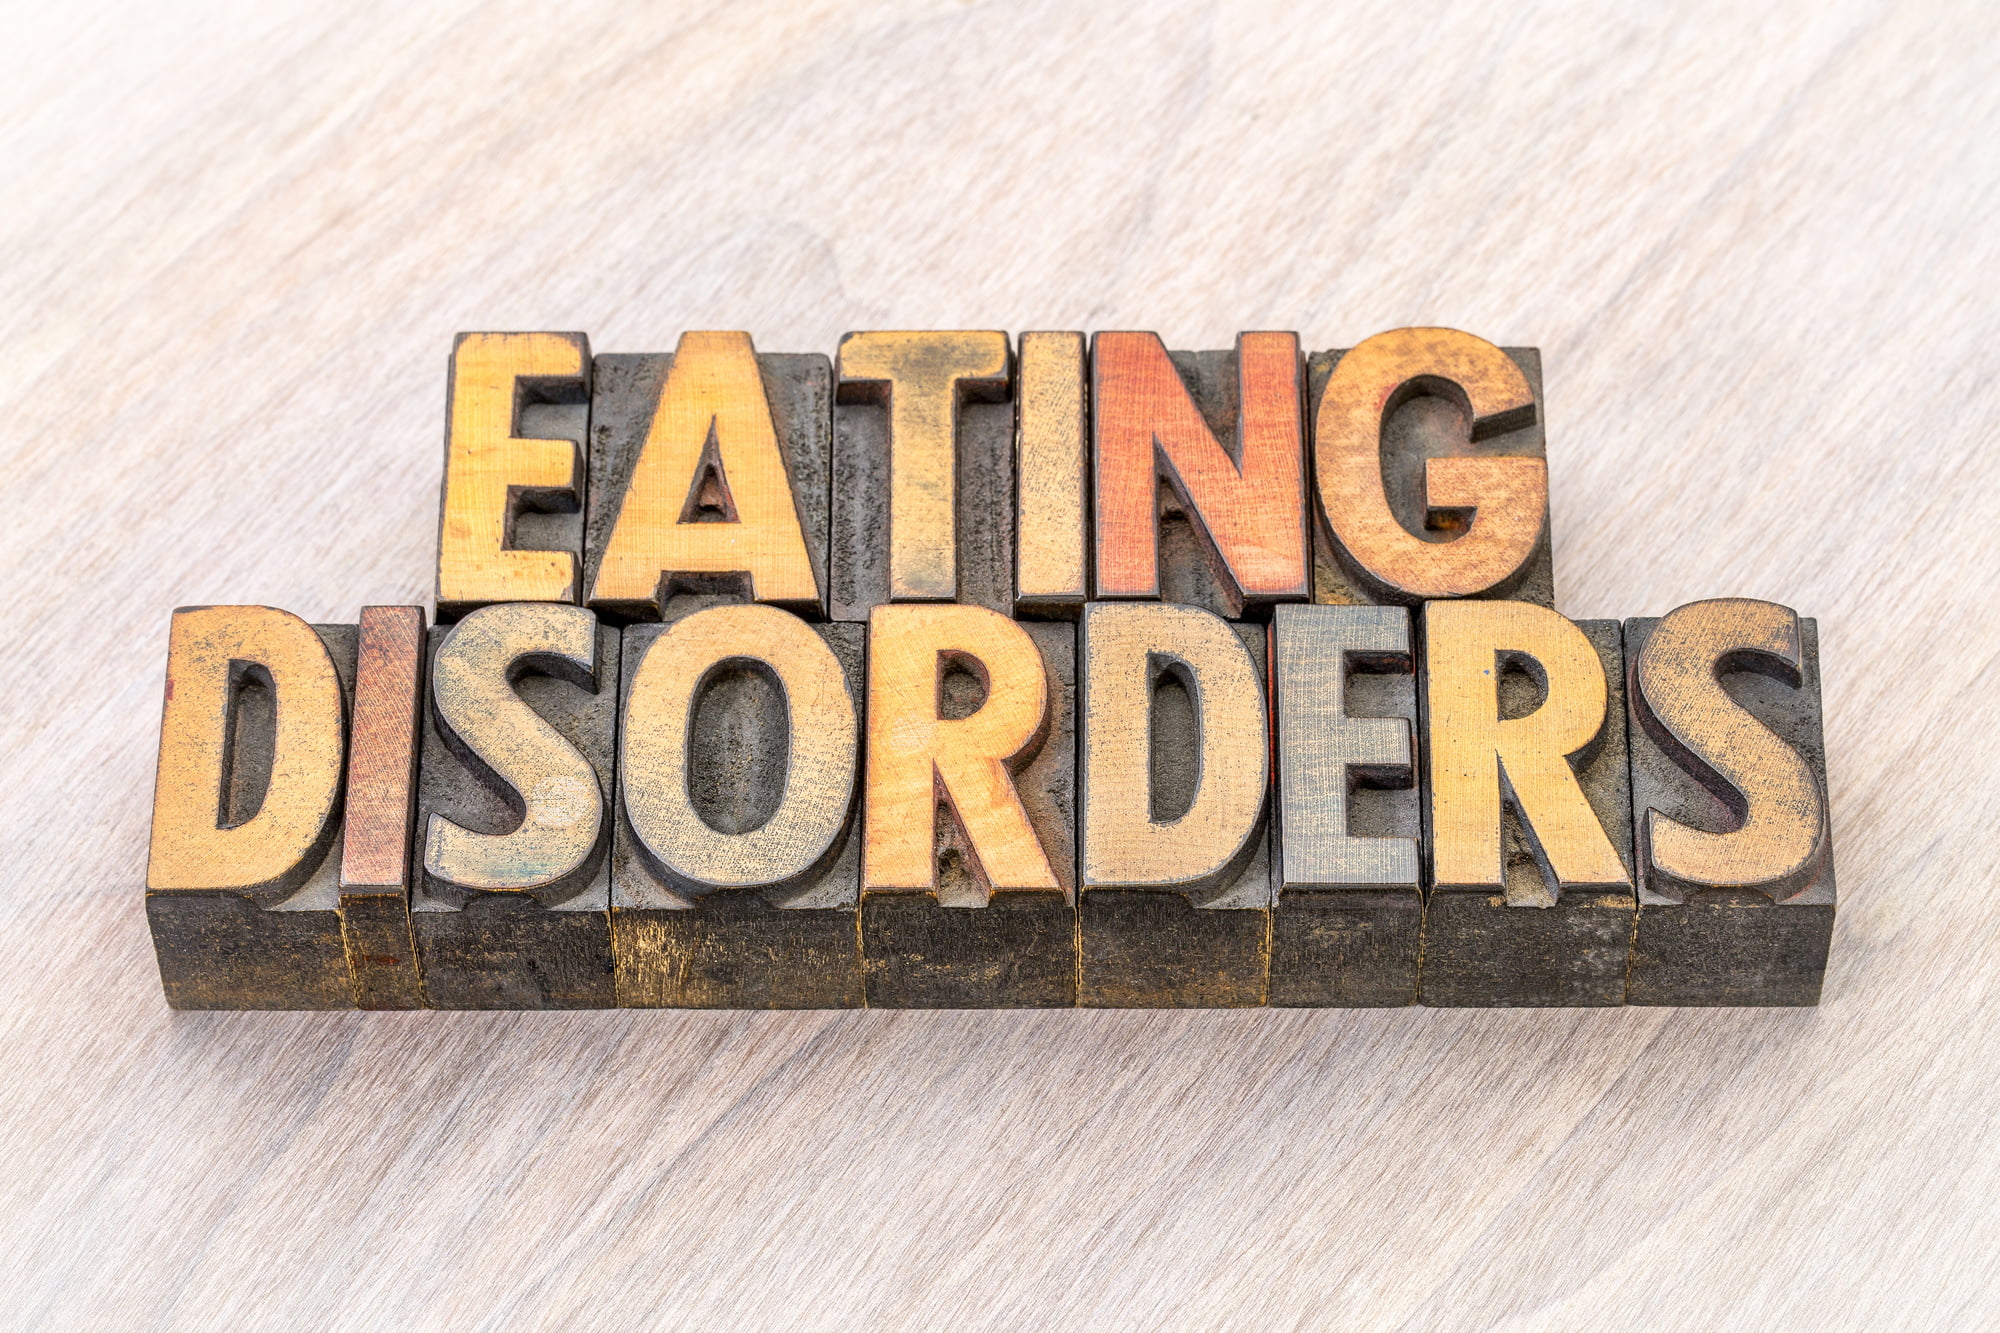 This guide provides valuable tips and strategies for successful binge eating disorder treatment, helping you regain control of your relationship with food.